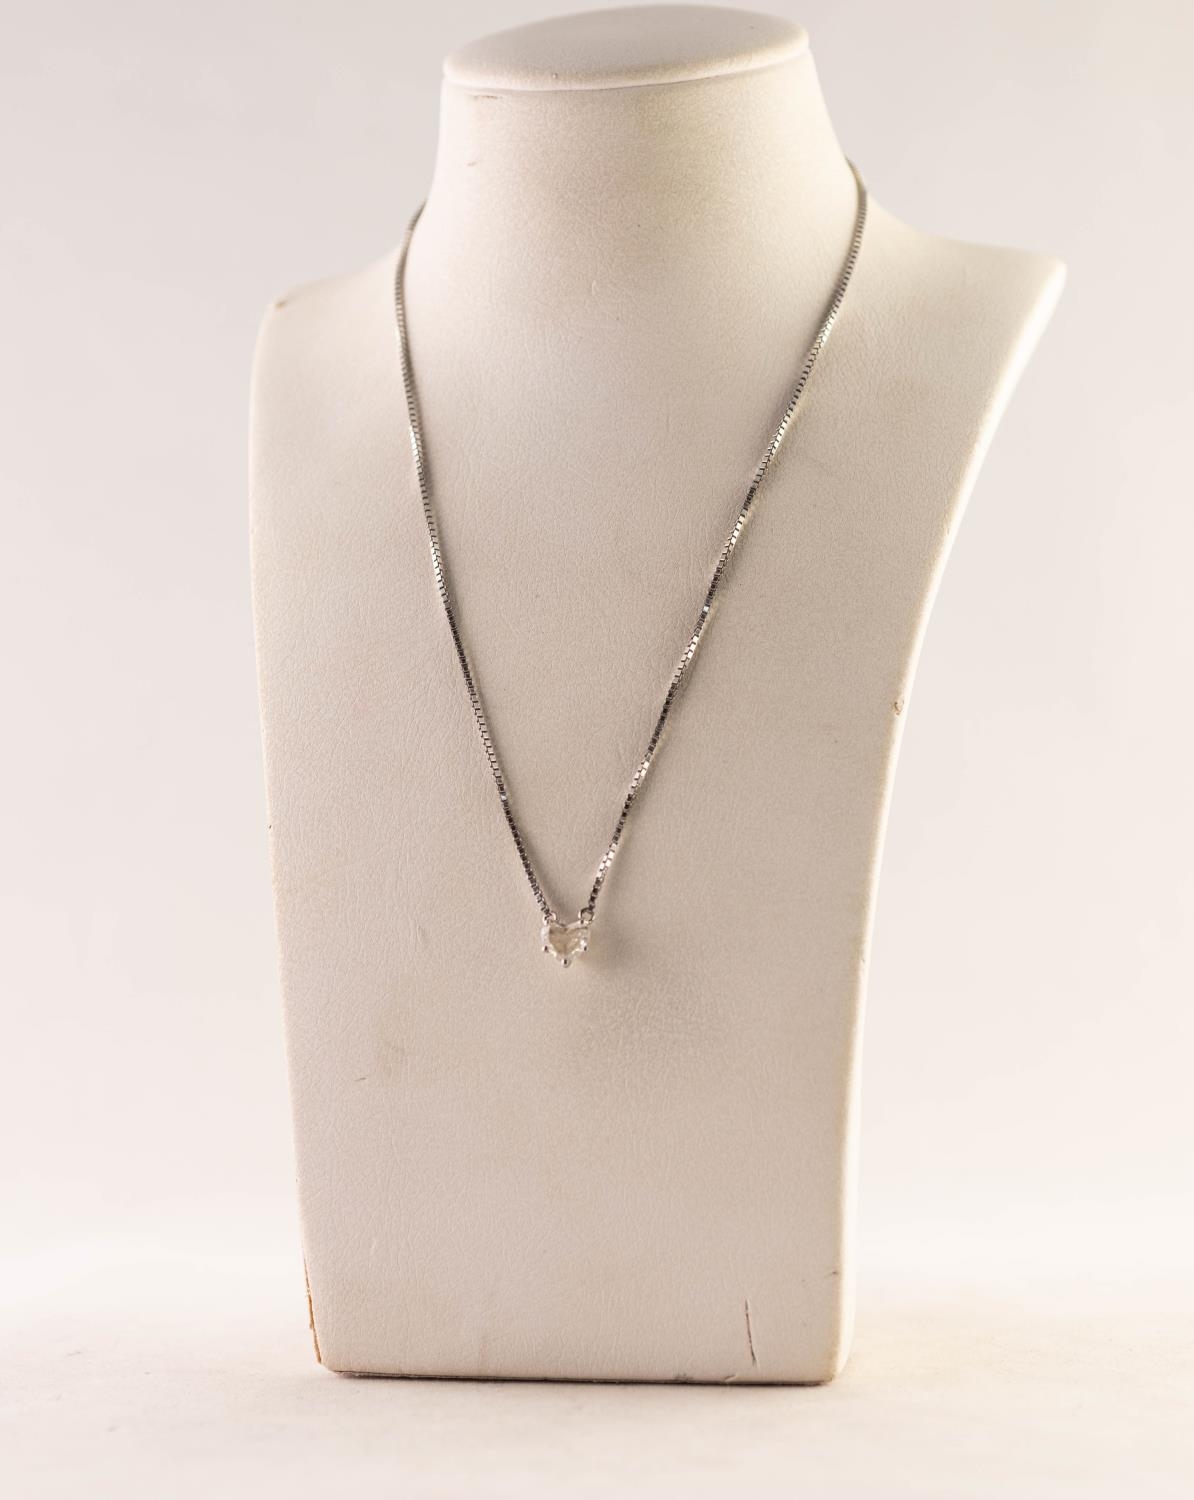 9ct WHITE OGLD FINE BOX LINK CHAIN NECKLACE, the front with a fixed heart shaped diamond in a five